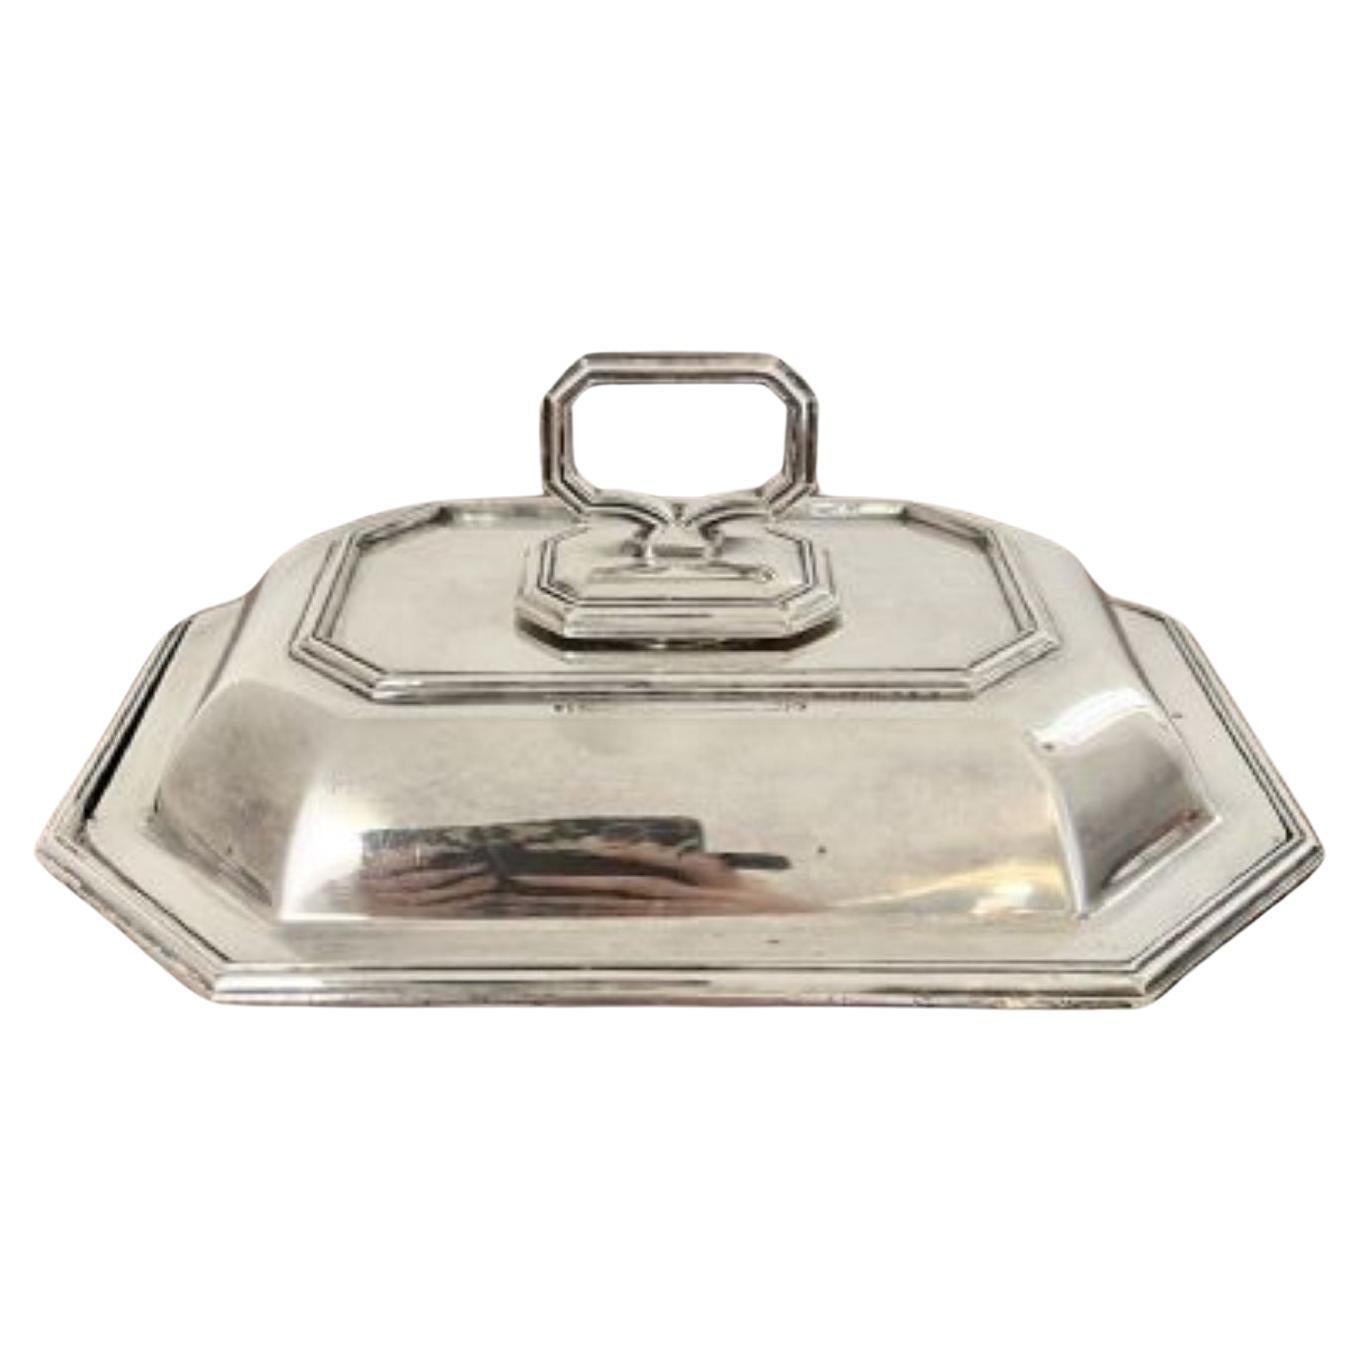 Lovely quality antique Edwardian silver plated rectangular entree dish  For Sale